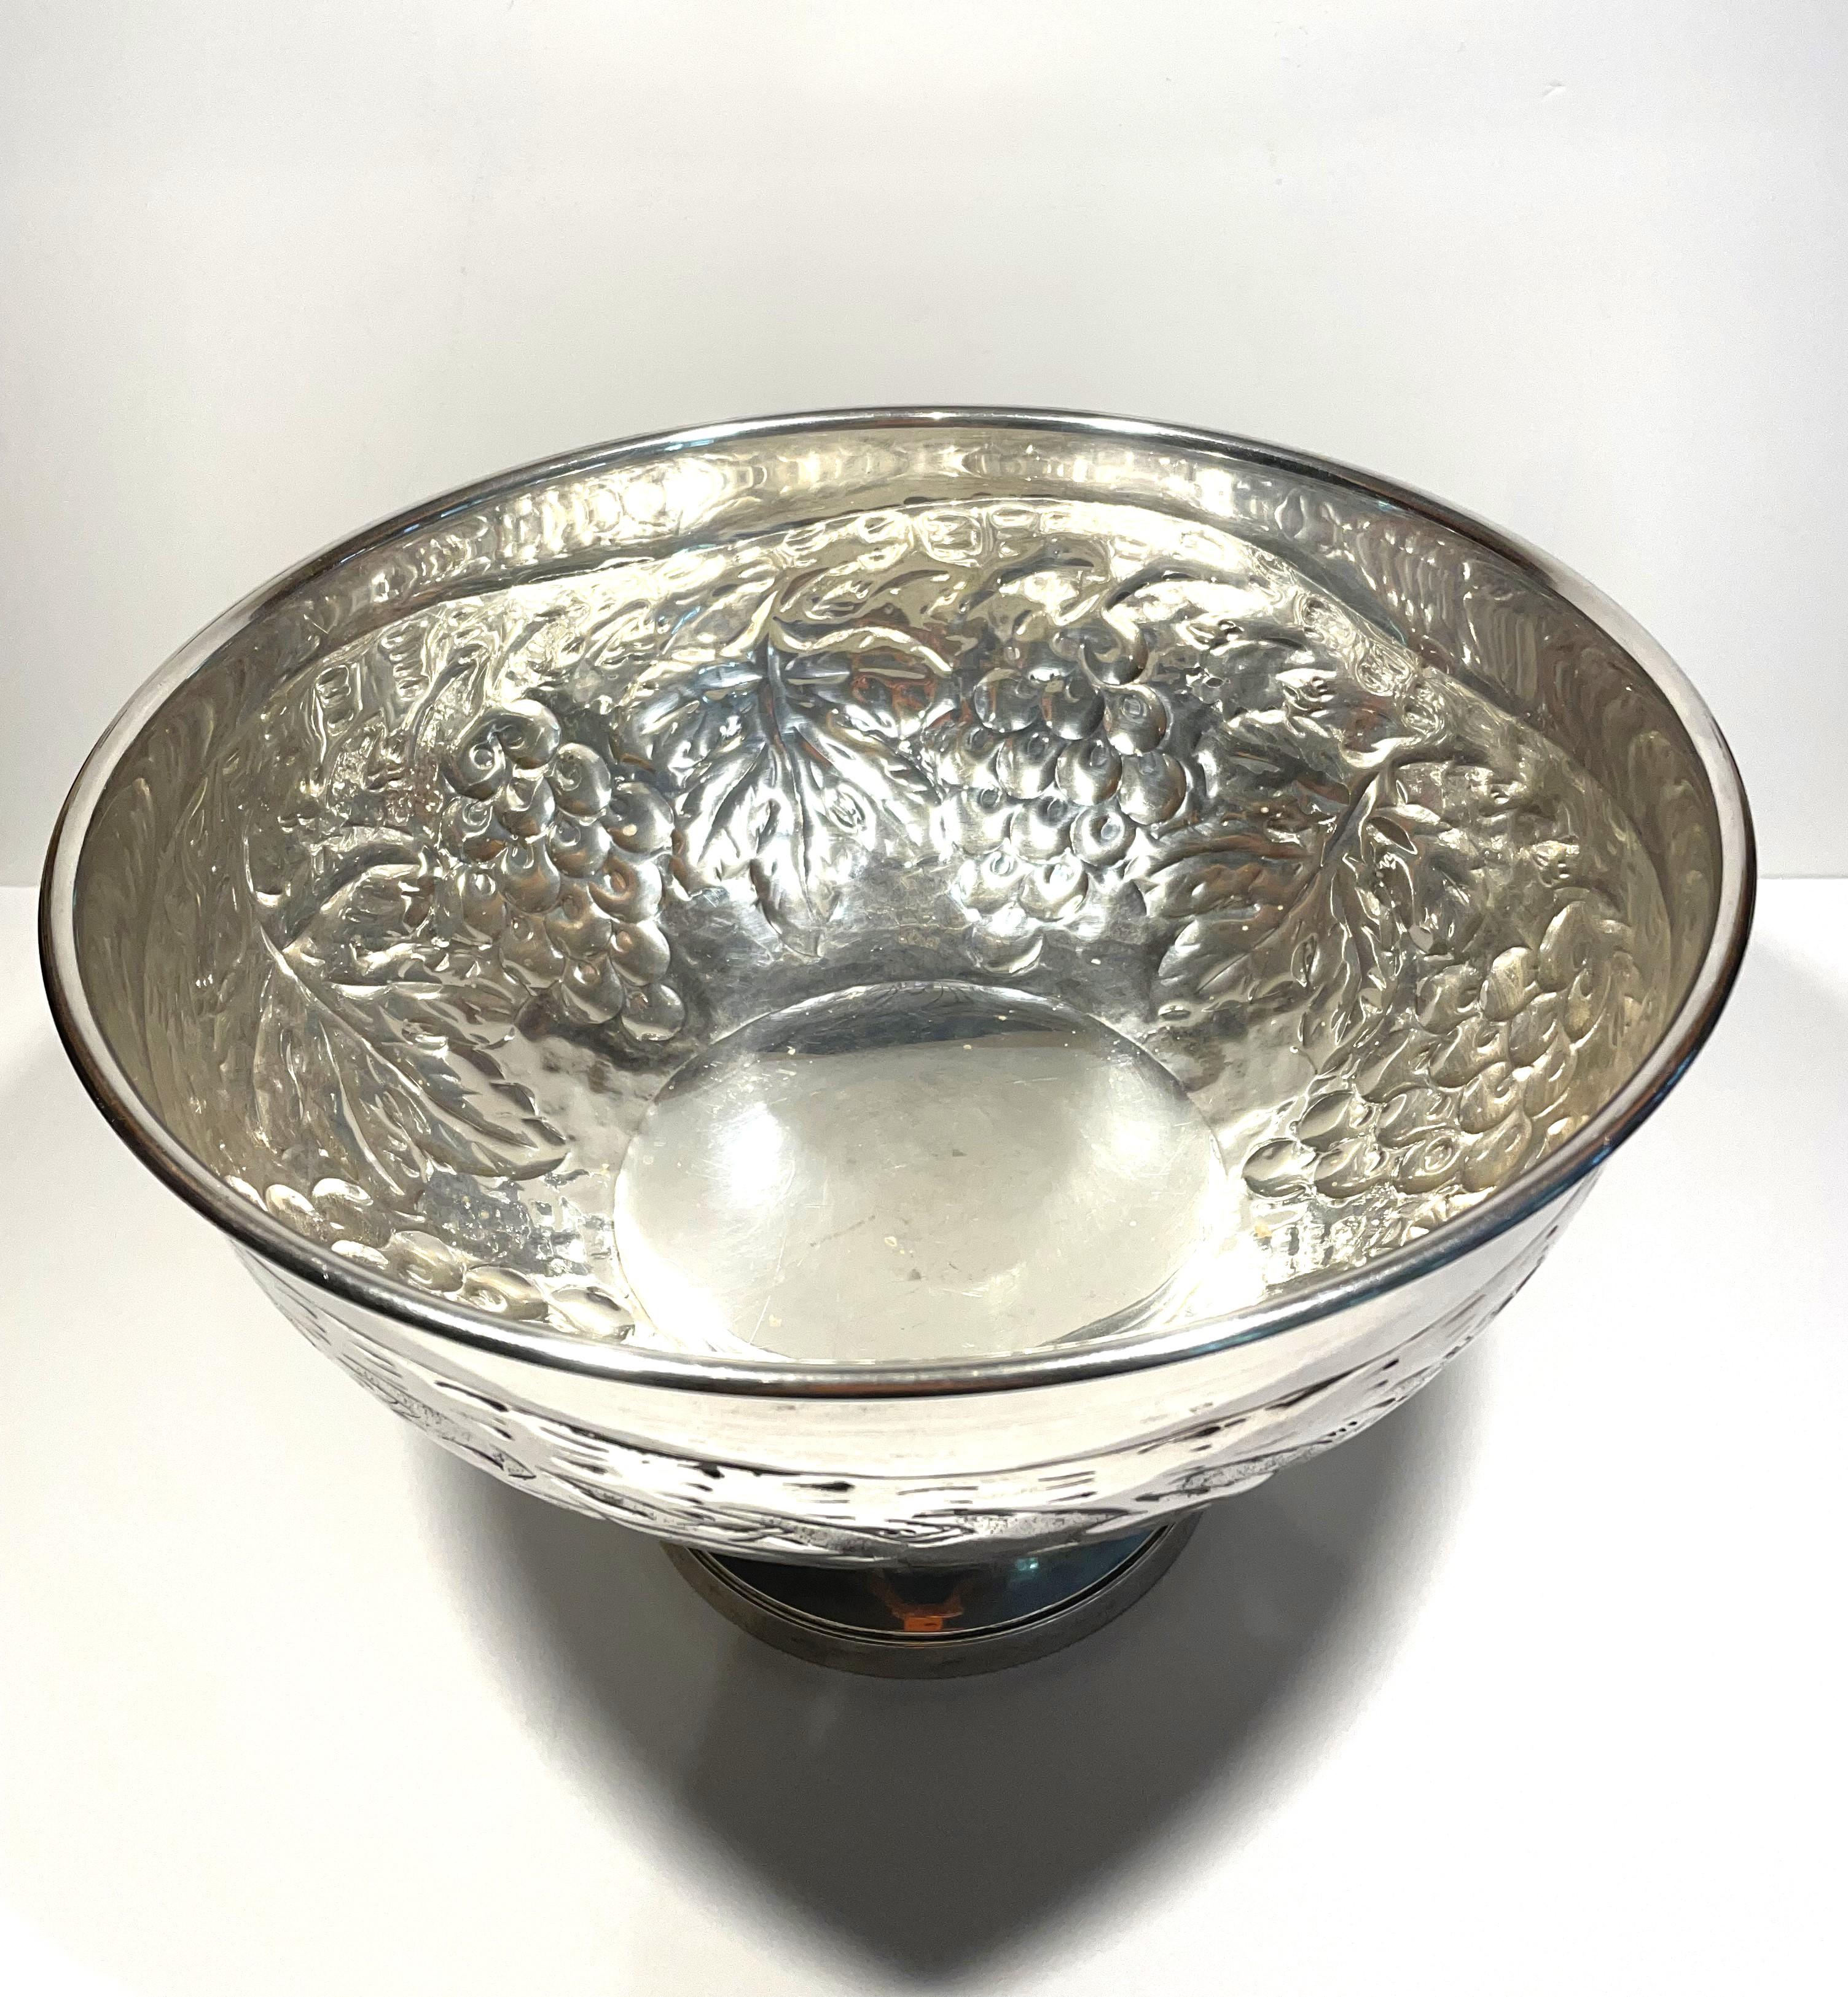 Spanish Large Artisan-Crafted Silver Urns - A Pair For Sale